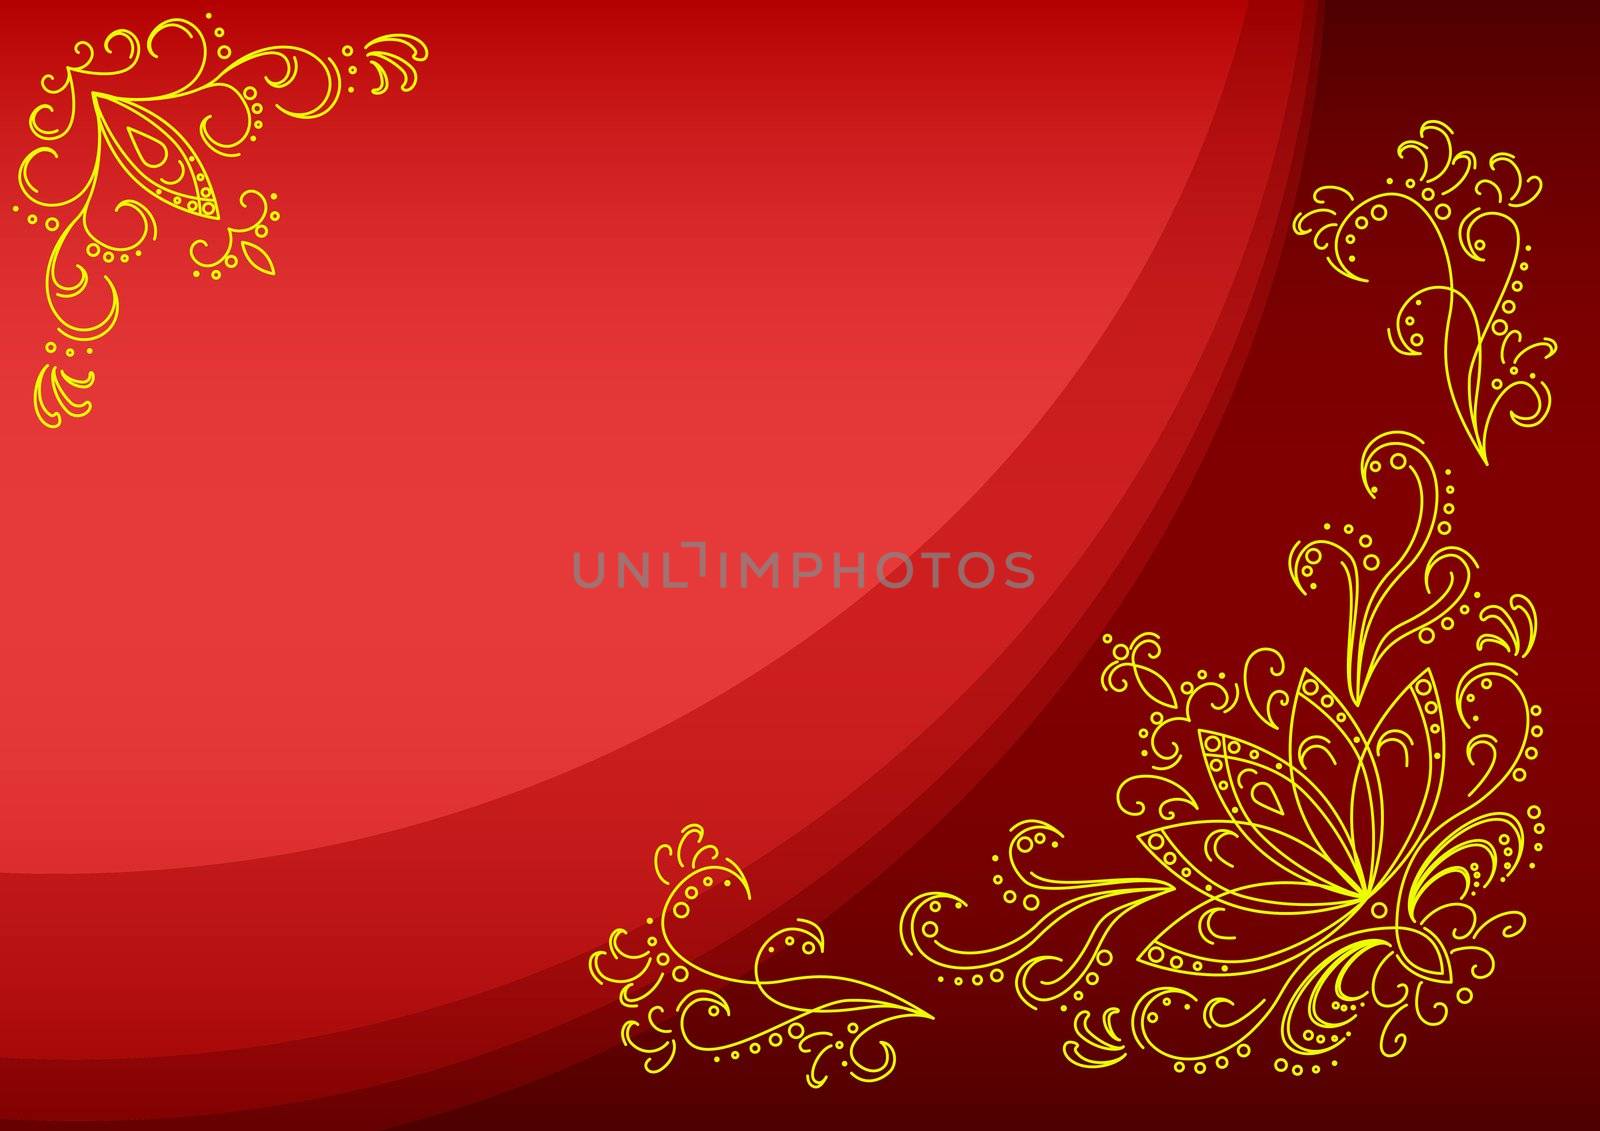 Abstract background, pattern: leaves, stalks and flowers on a scarlet